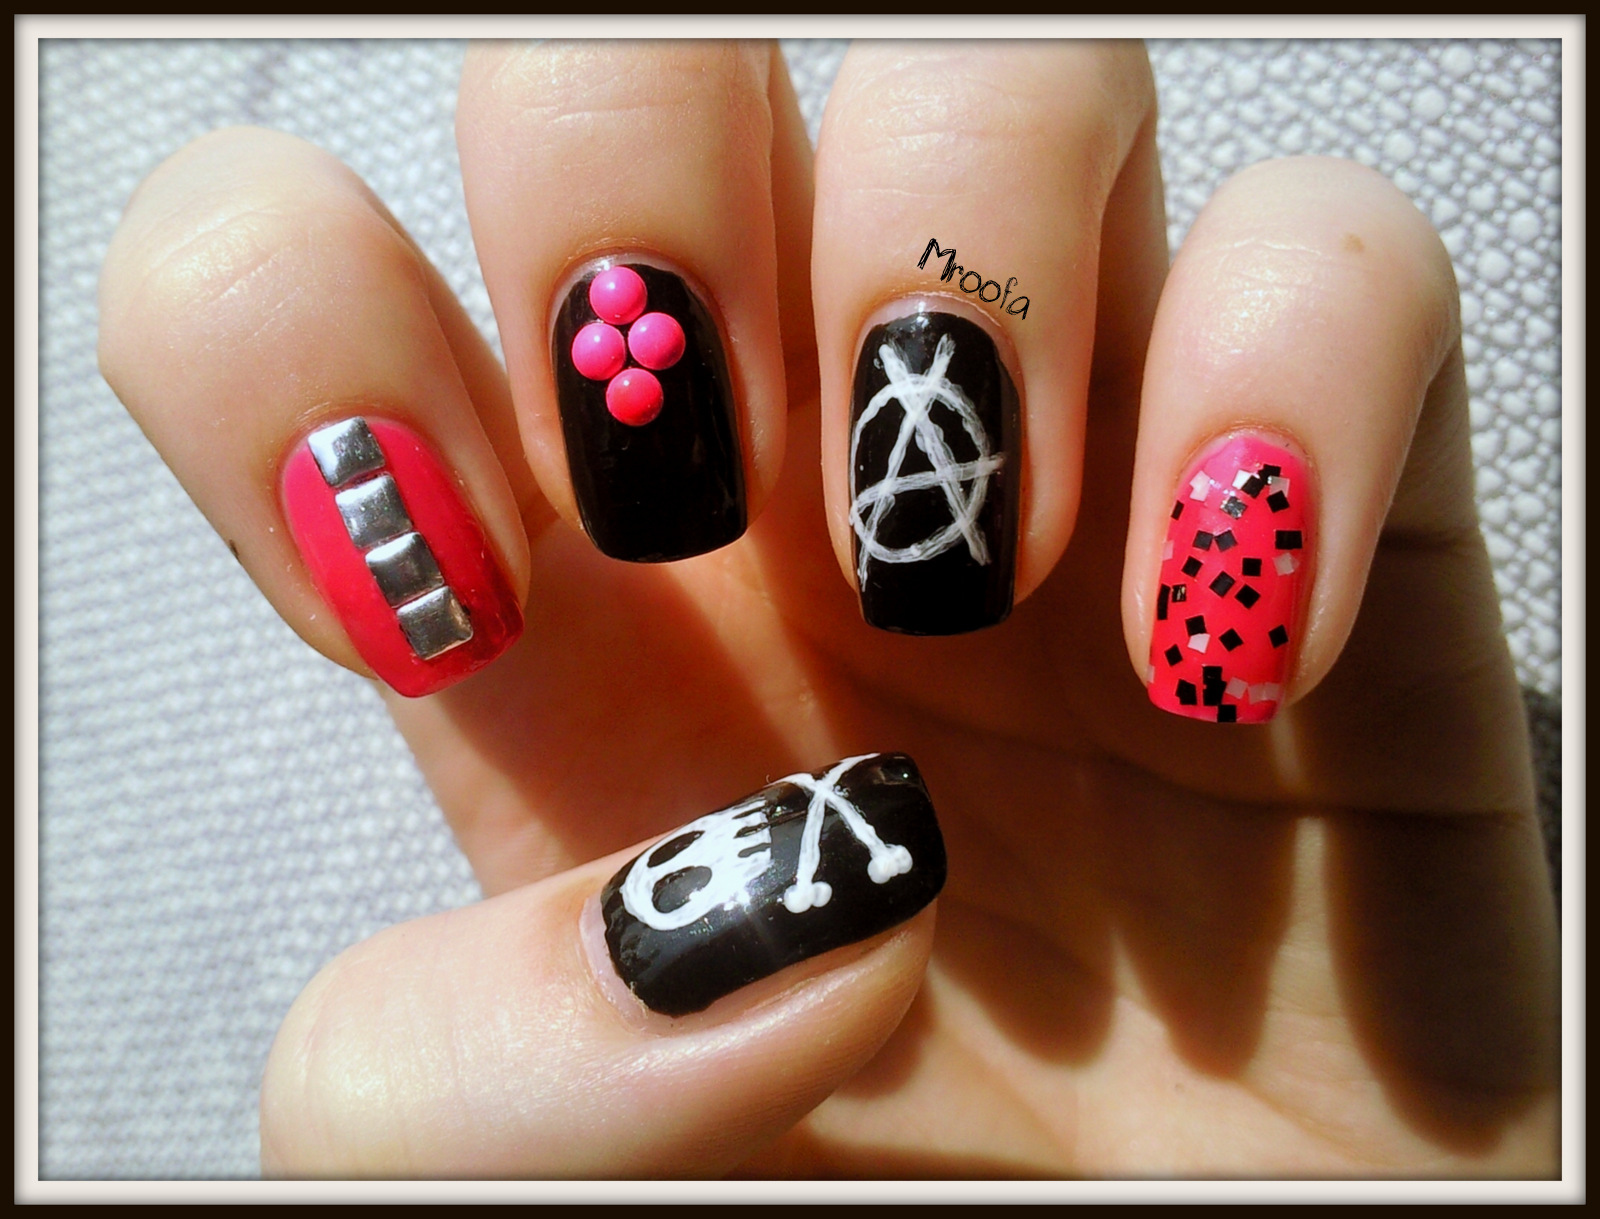 1. "Studded Punk Rock Nails" - wide 4